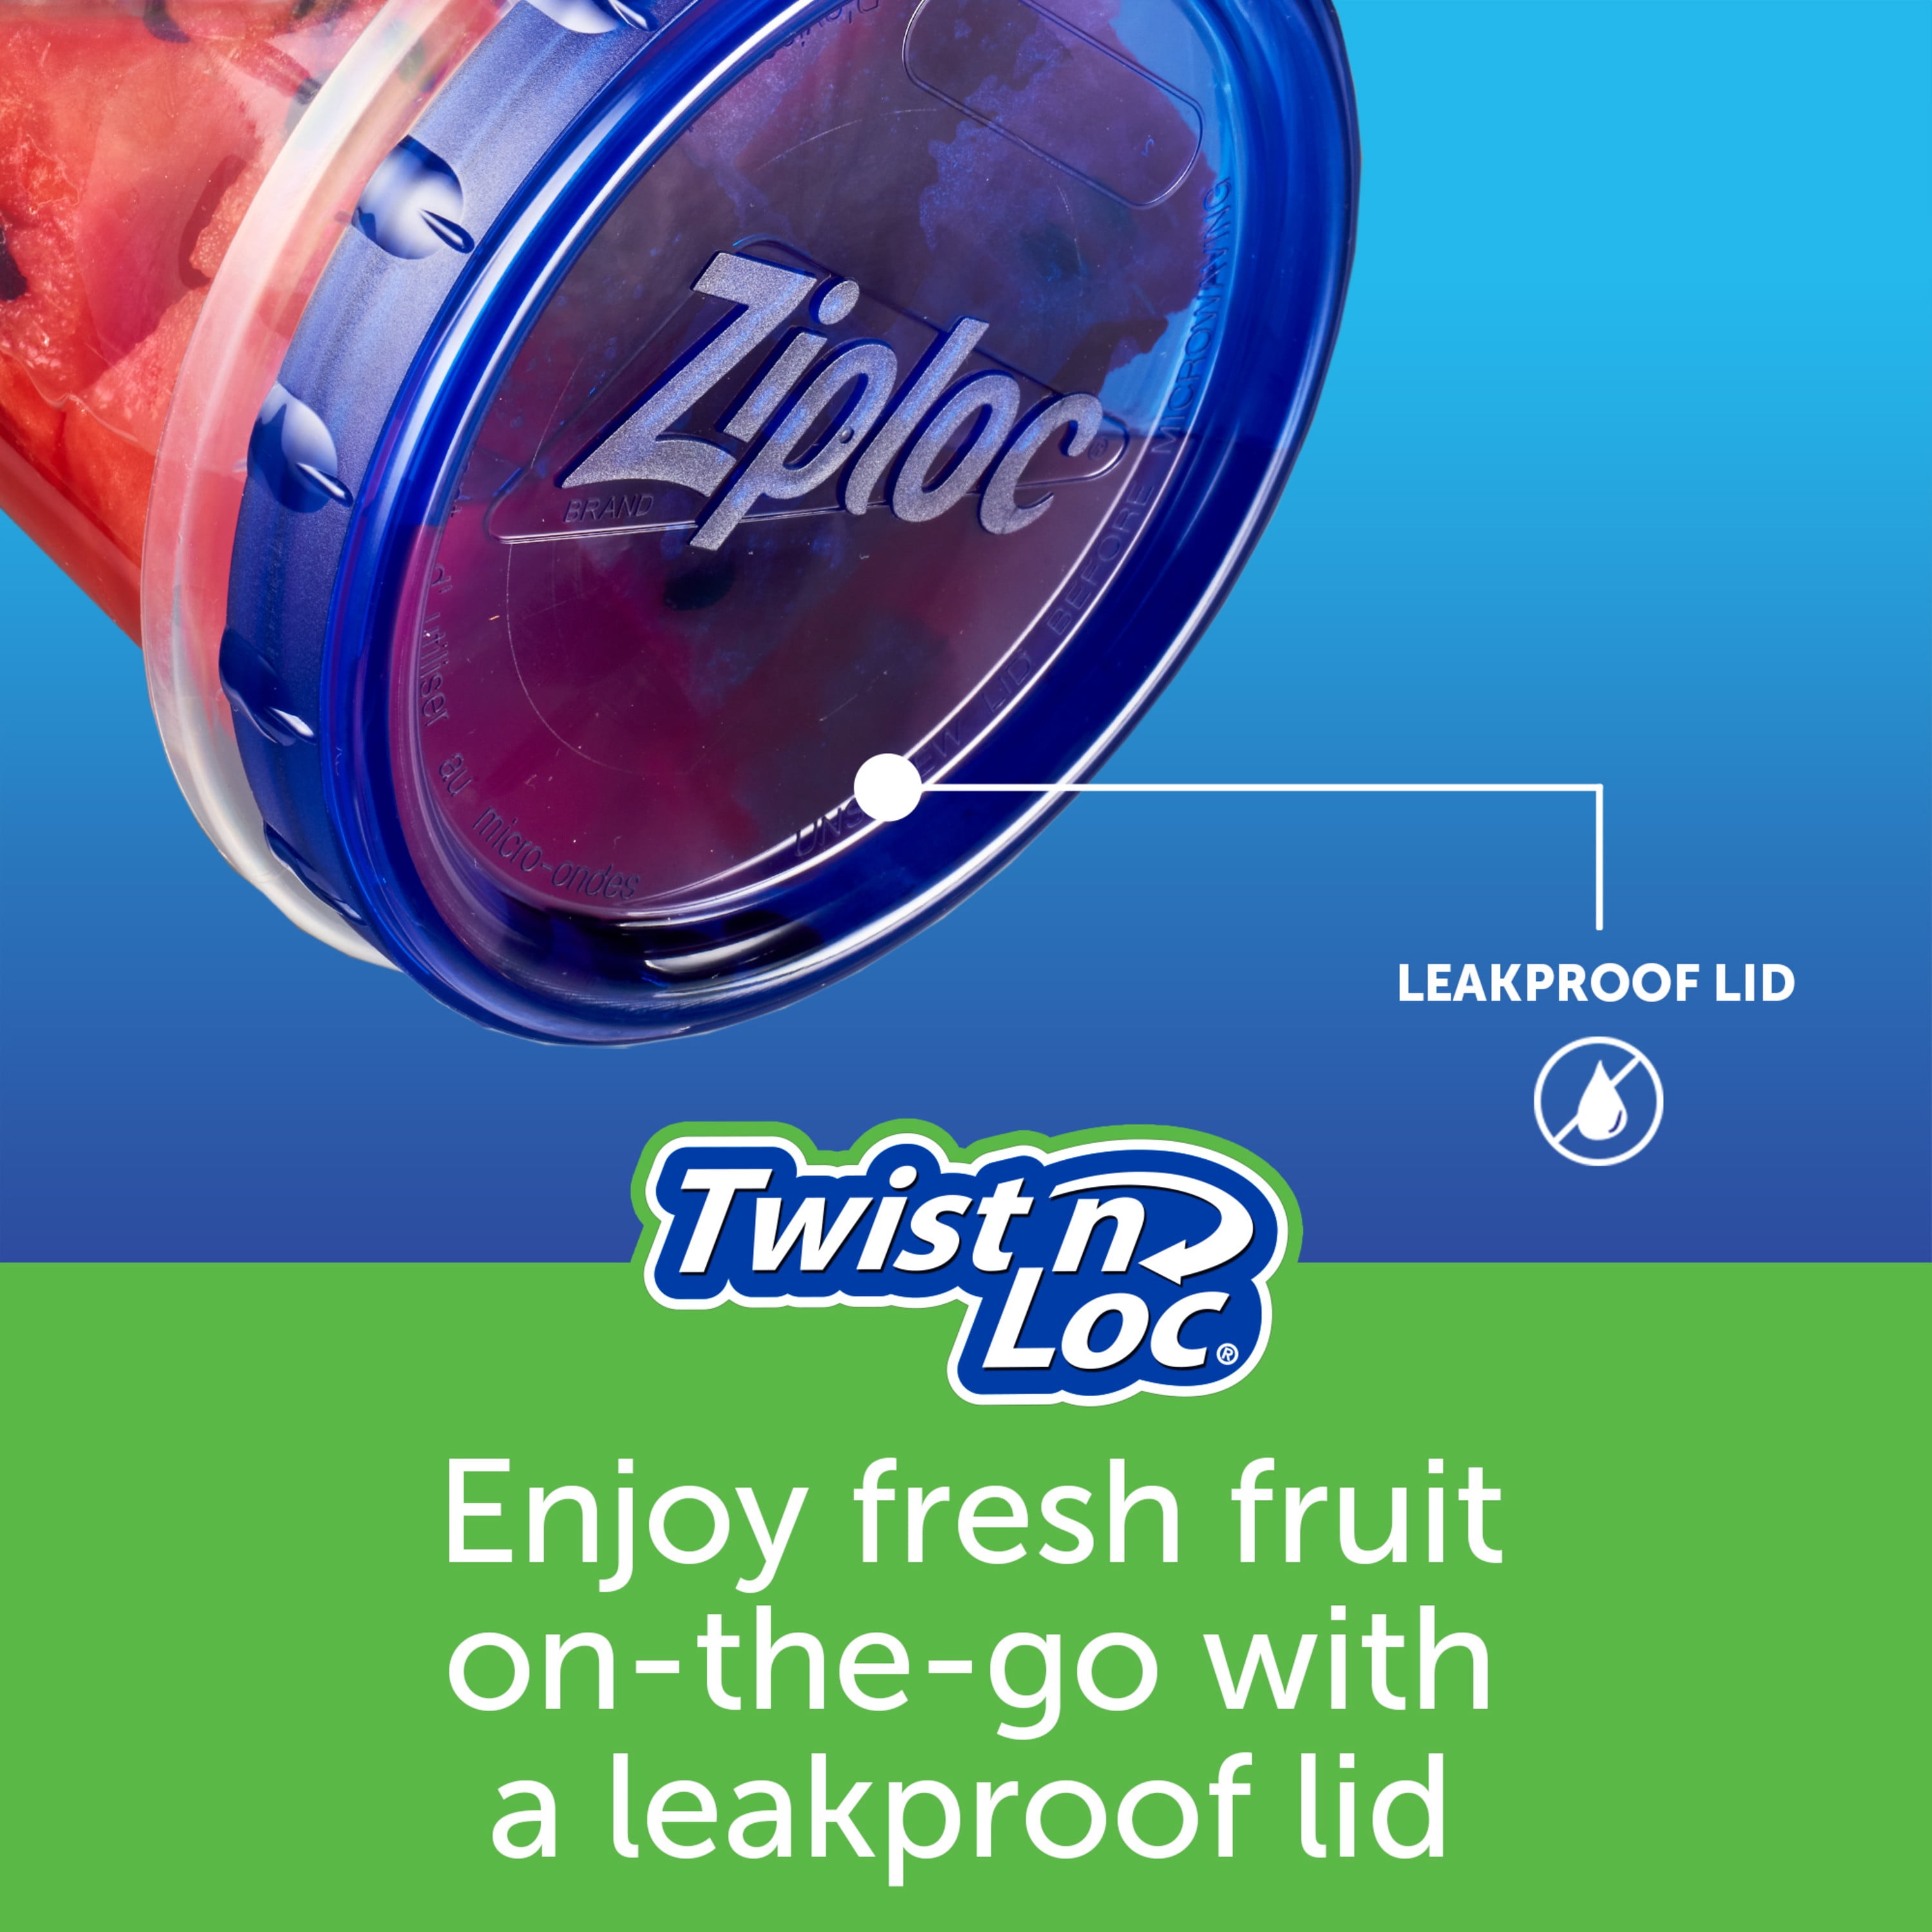 Ziploc Twist N Loc Containers, Small 3 Containers and 3 Lids (Pack